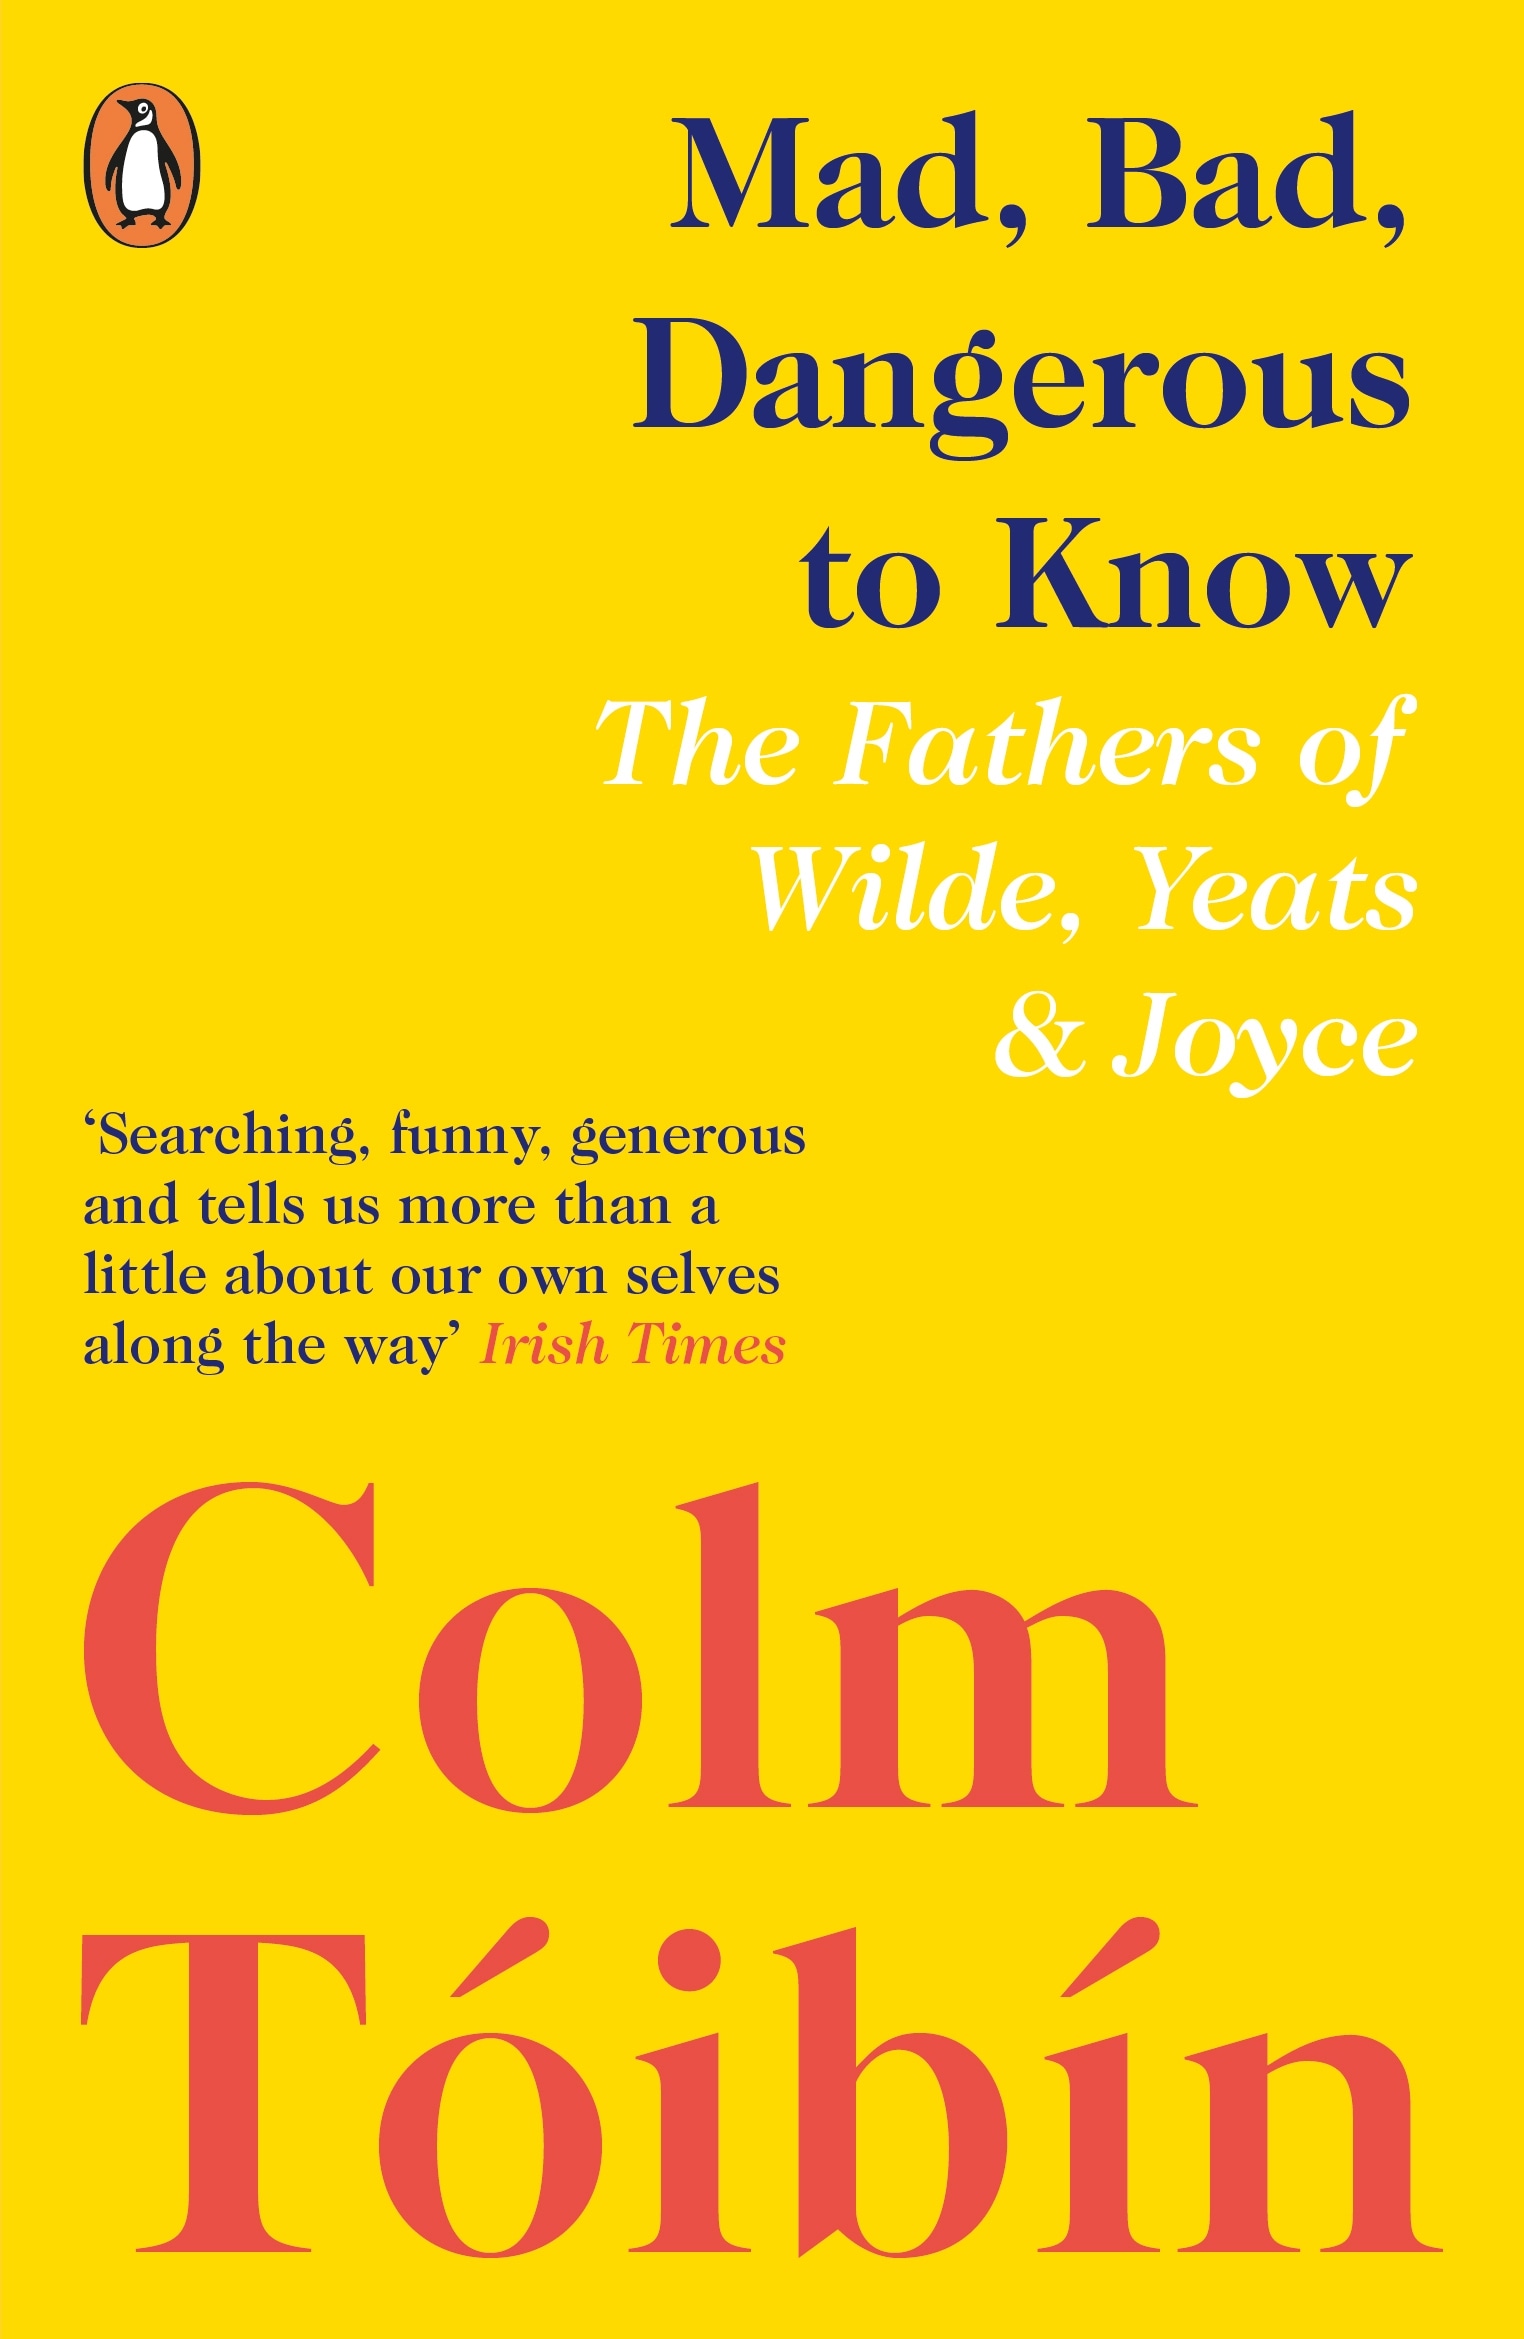 Book “Mad, Bad, Dangerous to Know” by Colm Tóibín — July 25, 2019